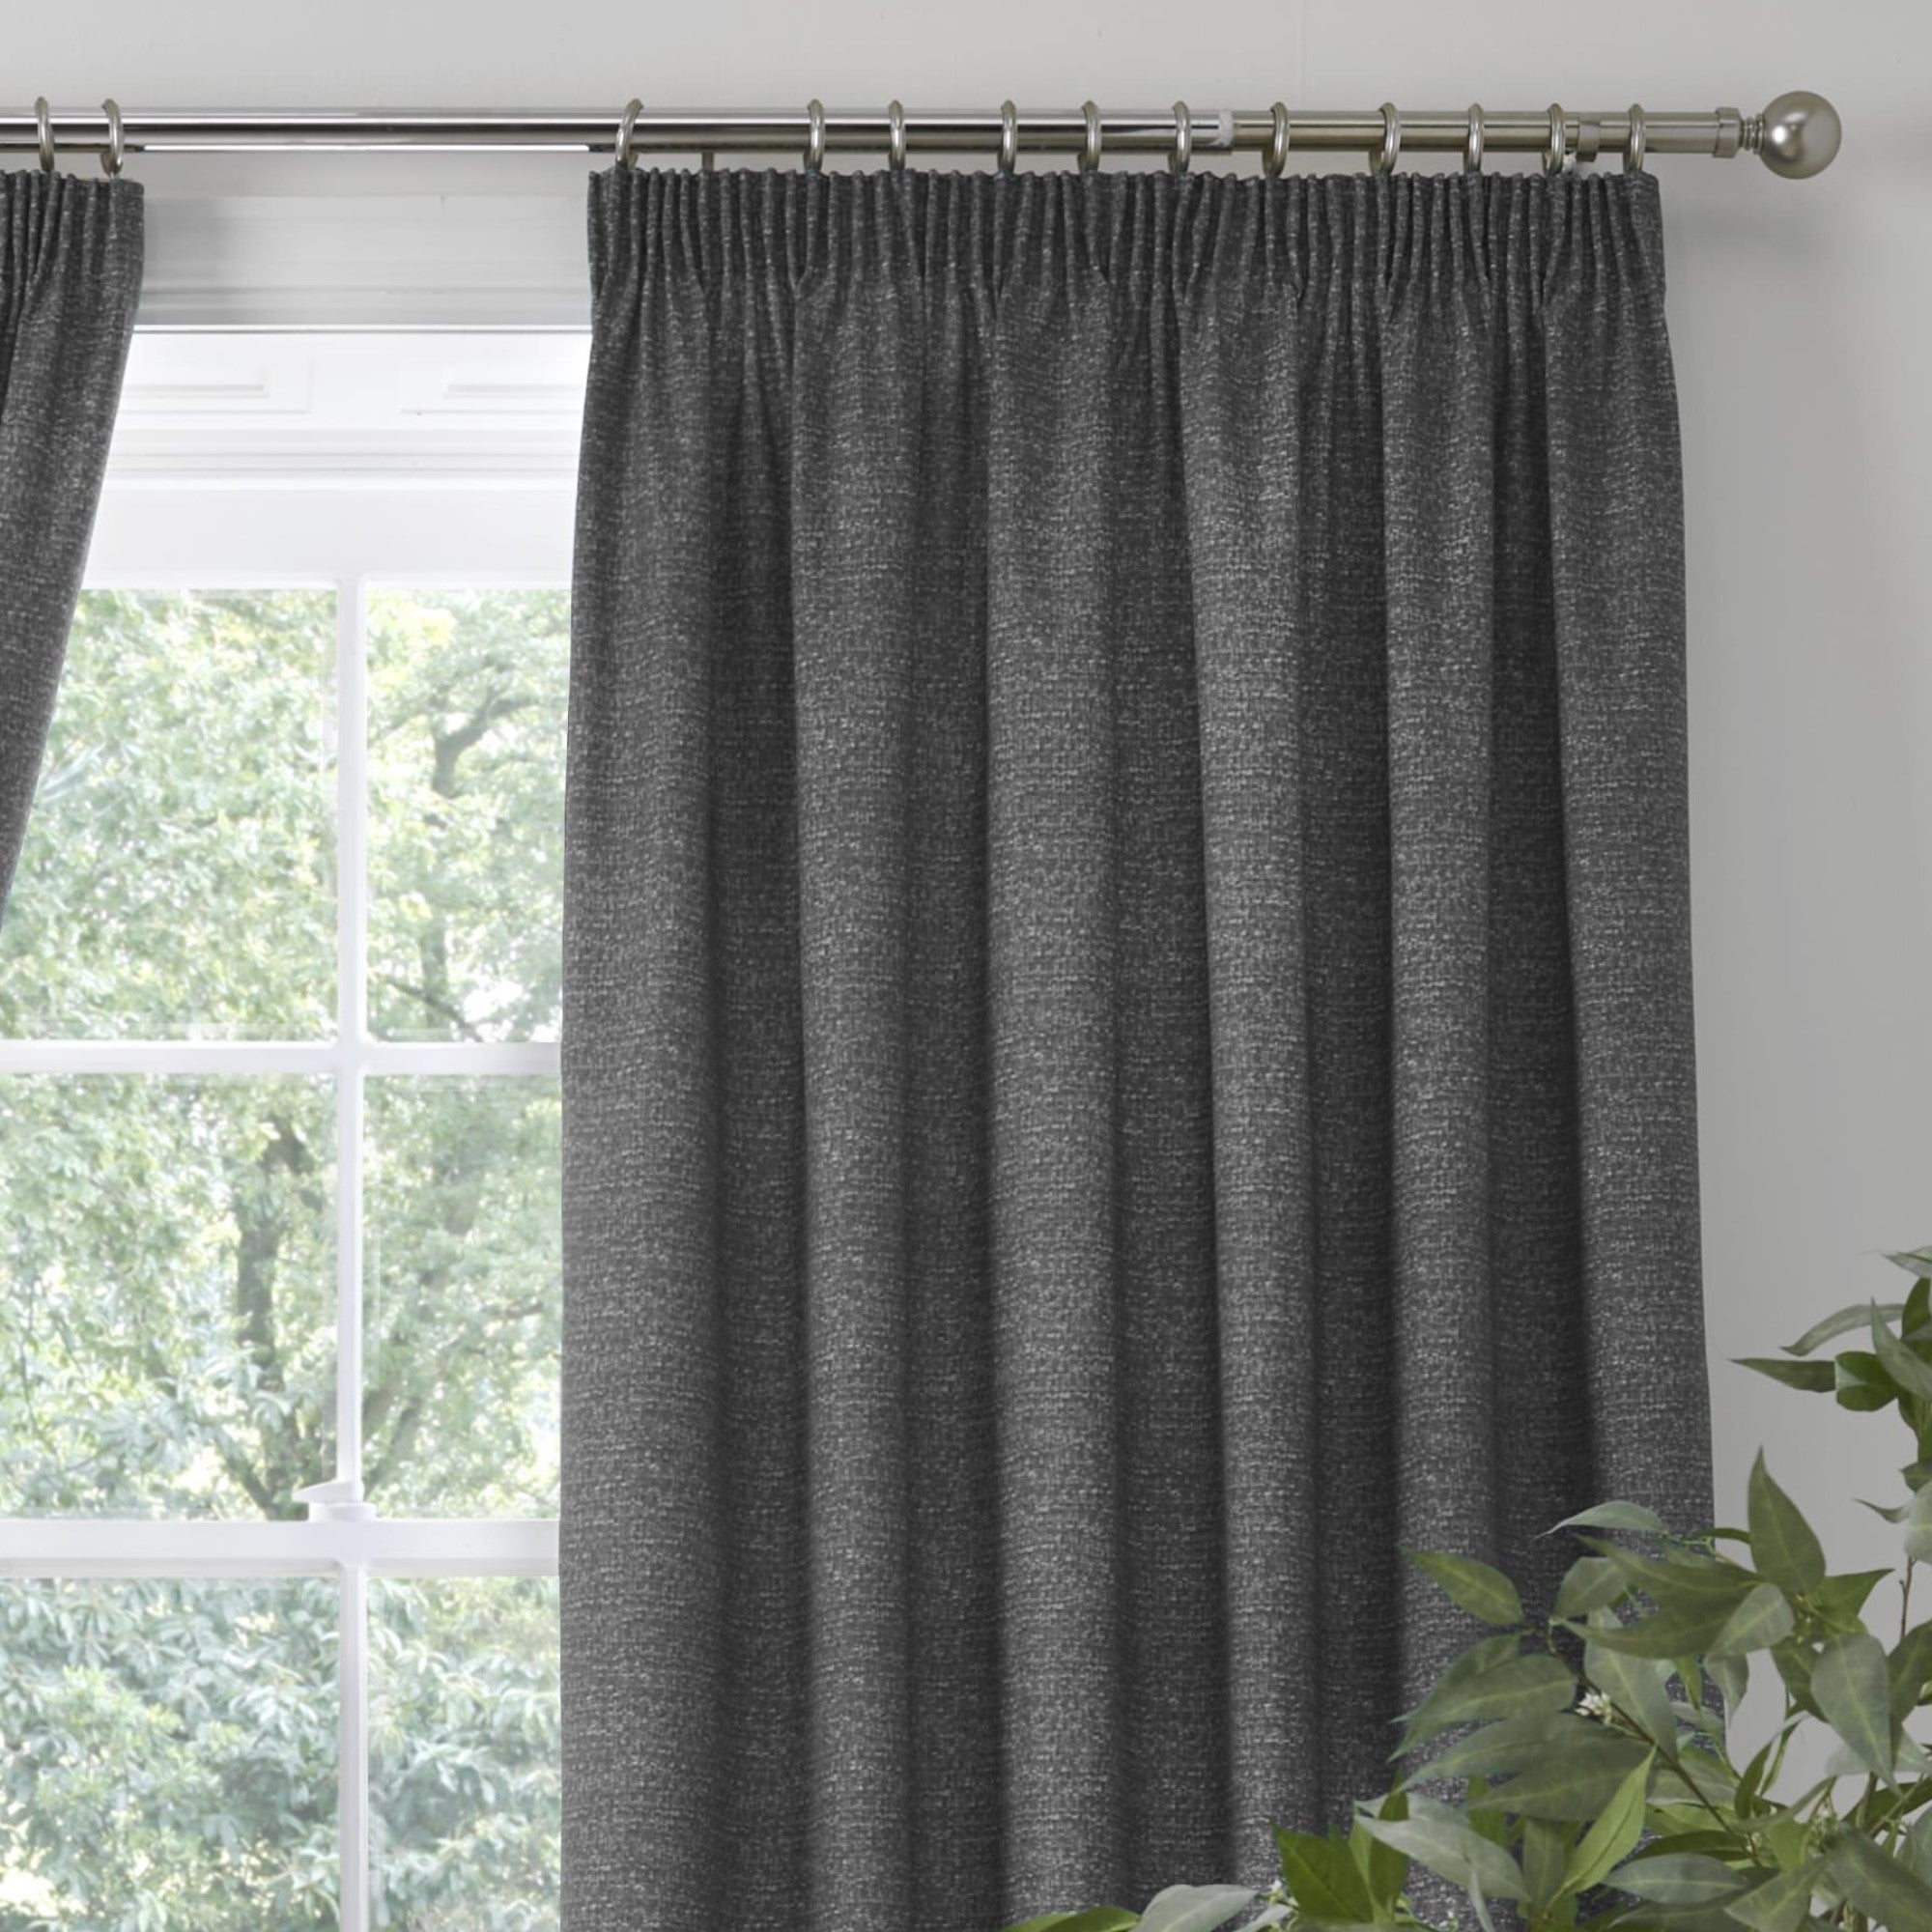 Pair of Pencil Pleat Curtains With Tie-Backs Pembrey by D&D in Charcoal